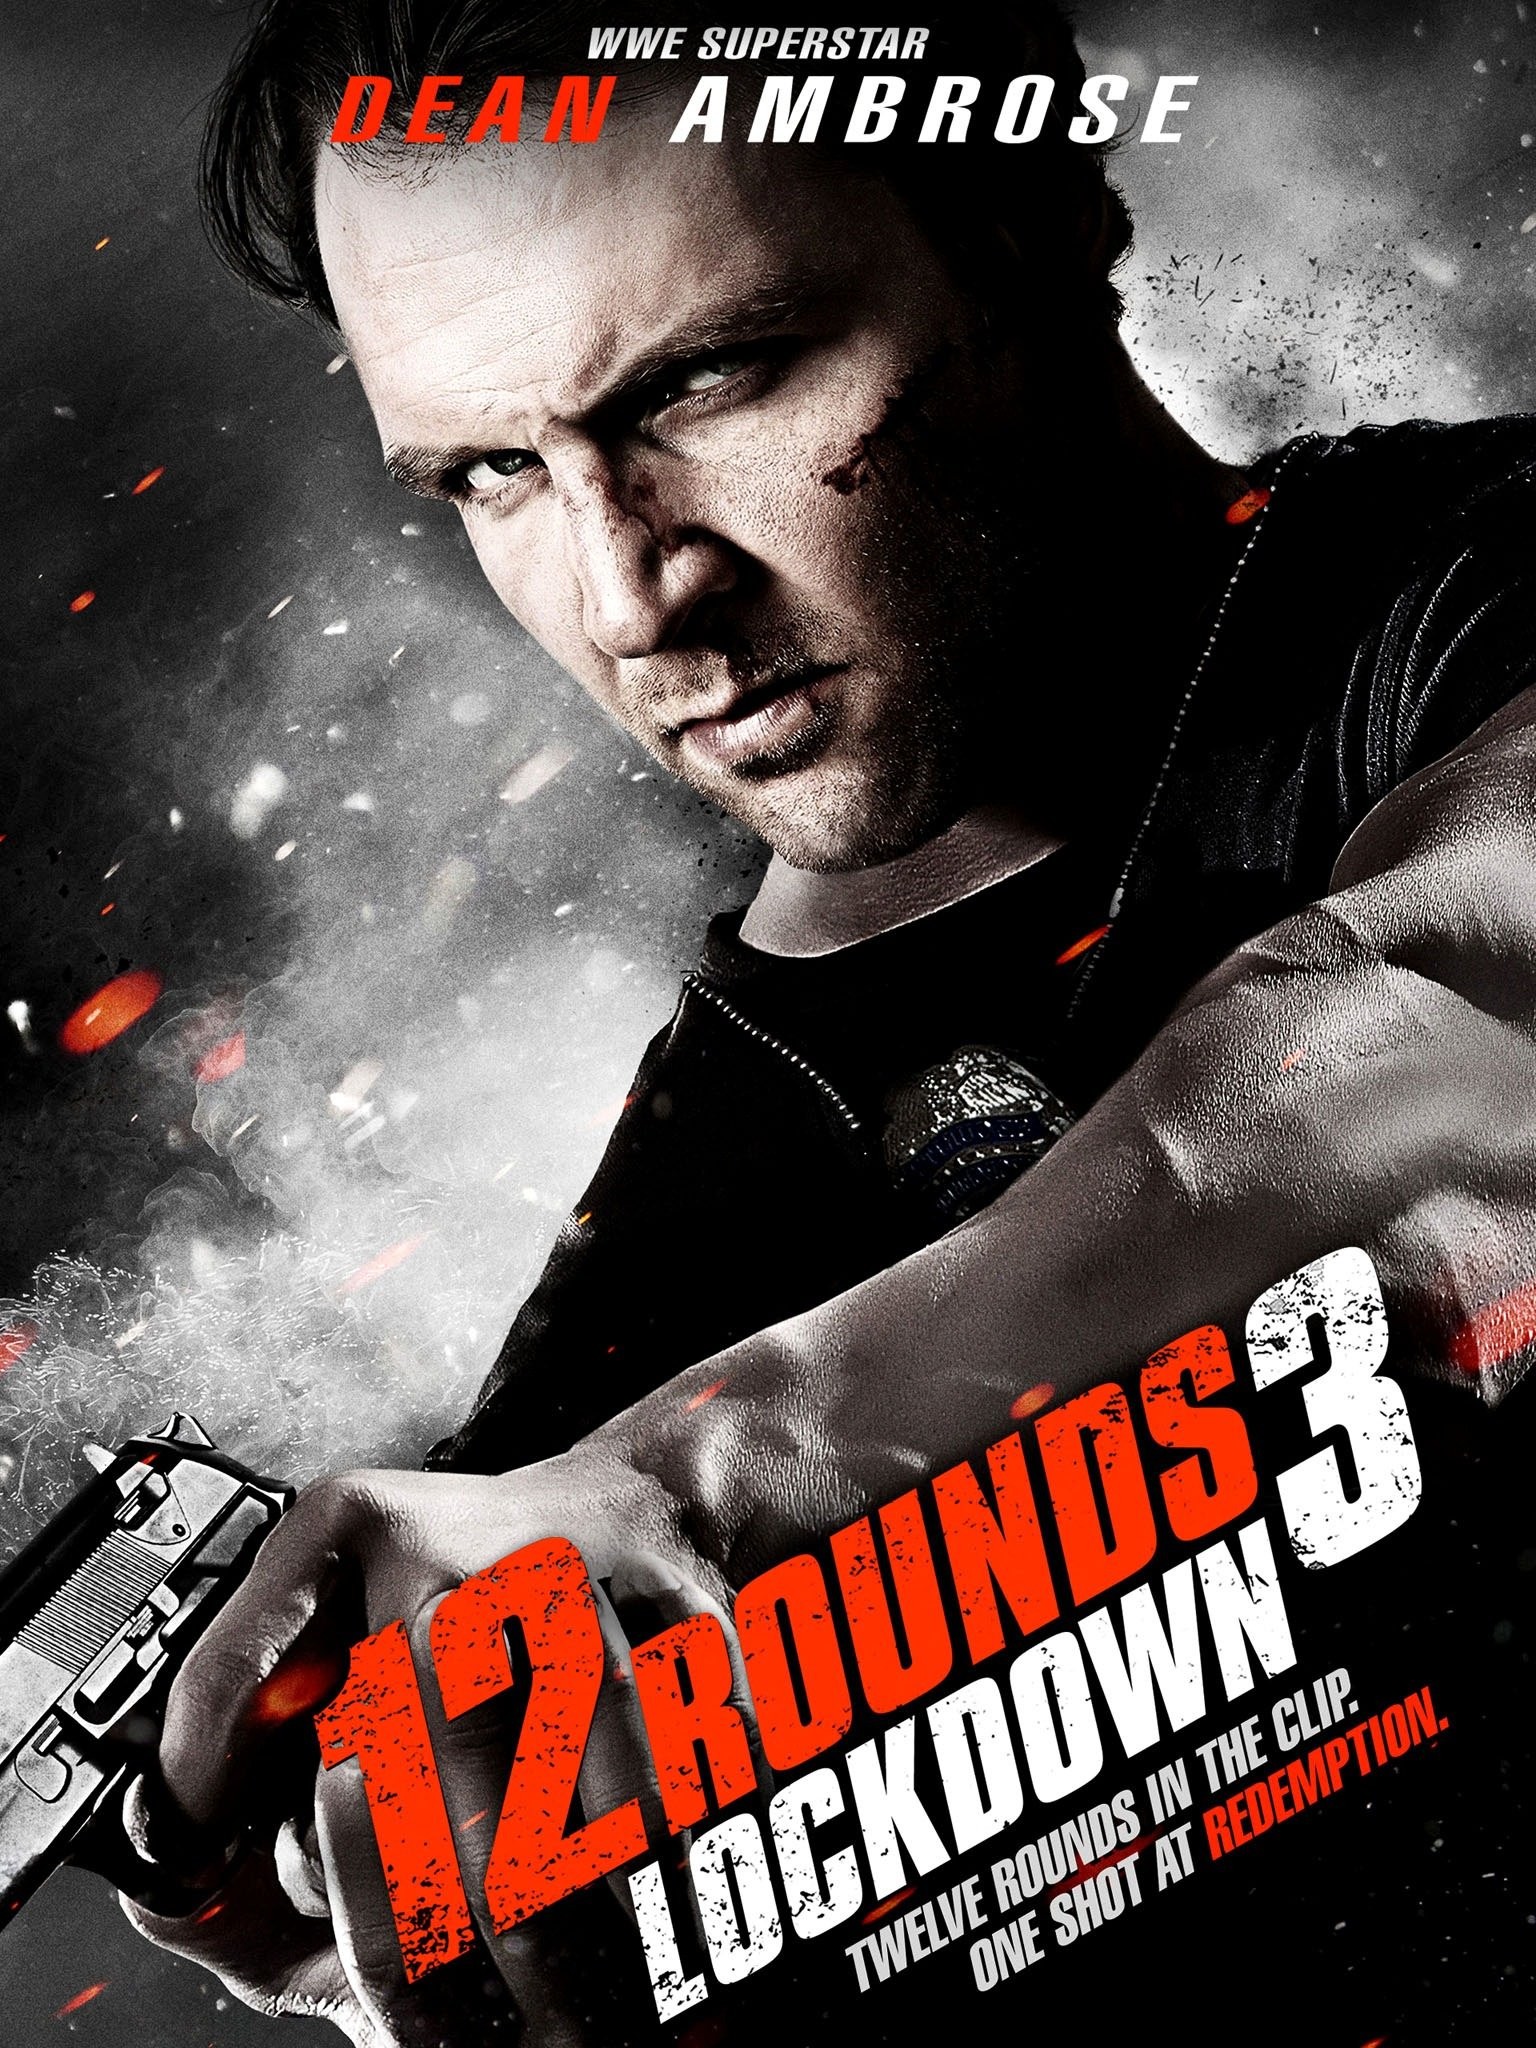 Original Film Title: 12 ROUNDS. English Title: 12 ROUNDS. Film